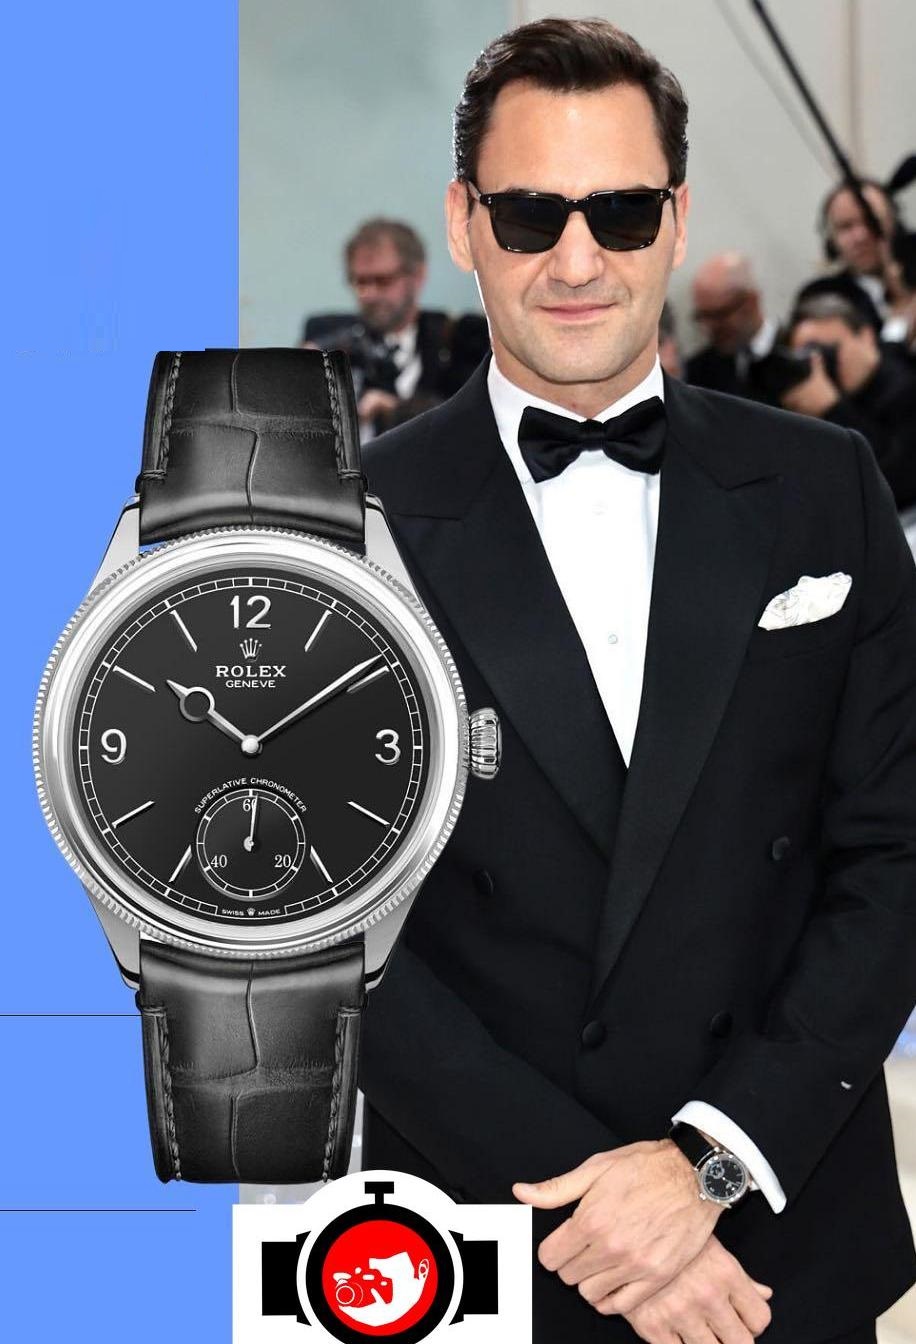 tennis player Roger Federer spotted wearing a Rolex 52509